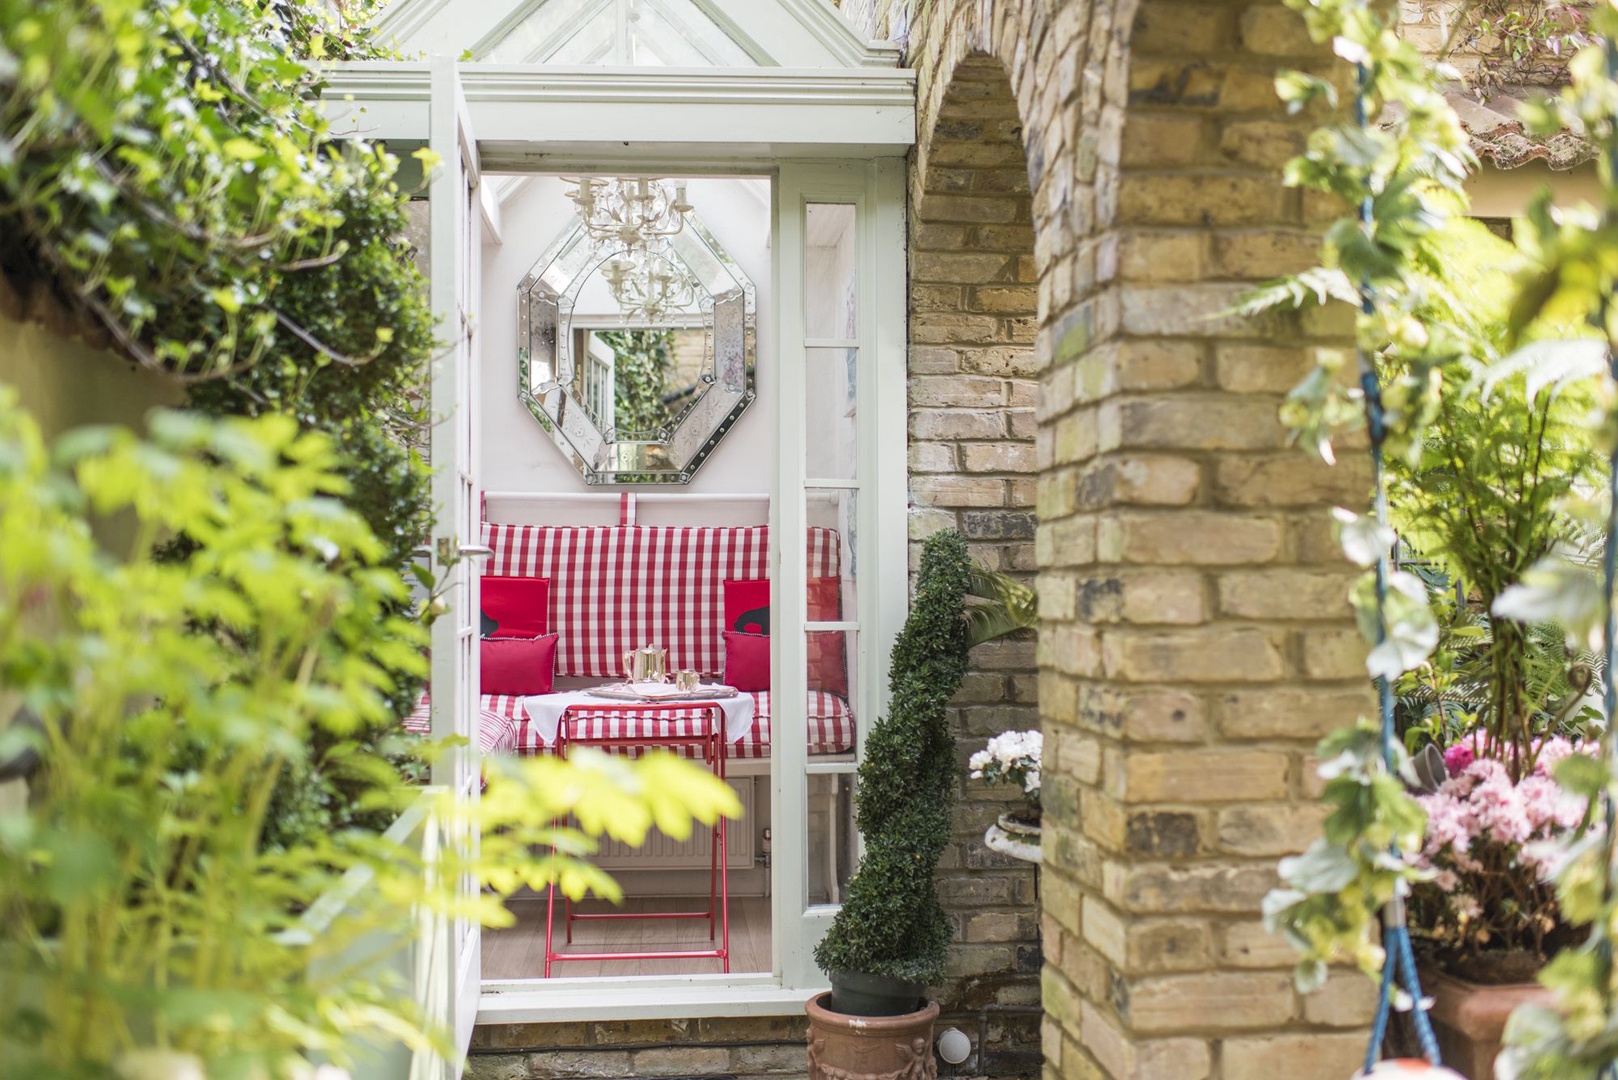 The door to the garden looks directly onto the delightful glass conservatory with chairs and table